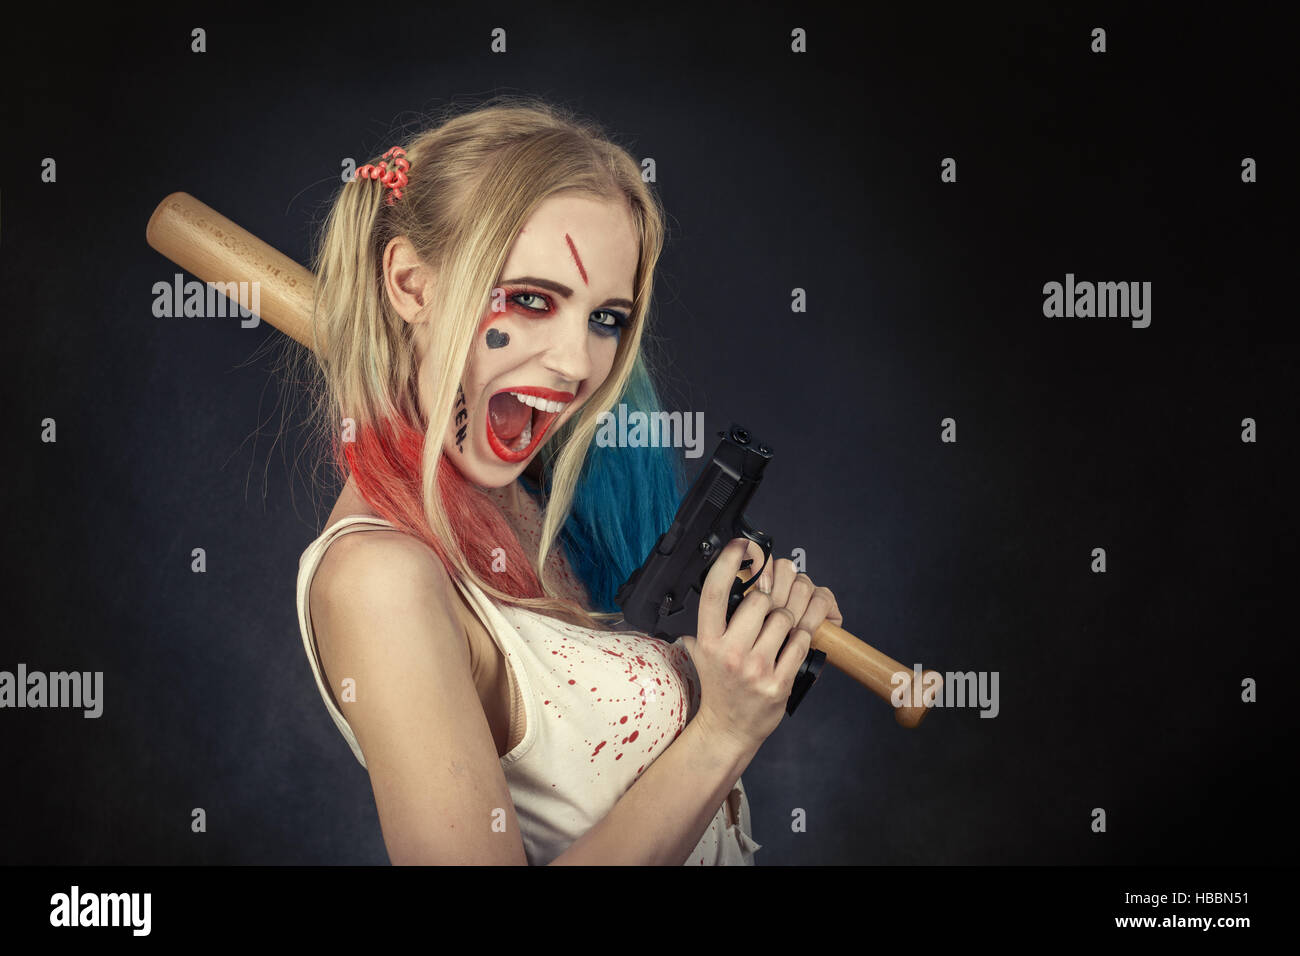 Cosplayer girl in Harley Quinn makeup and costume Stock Photo